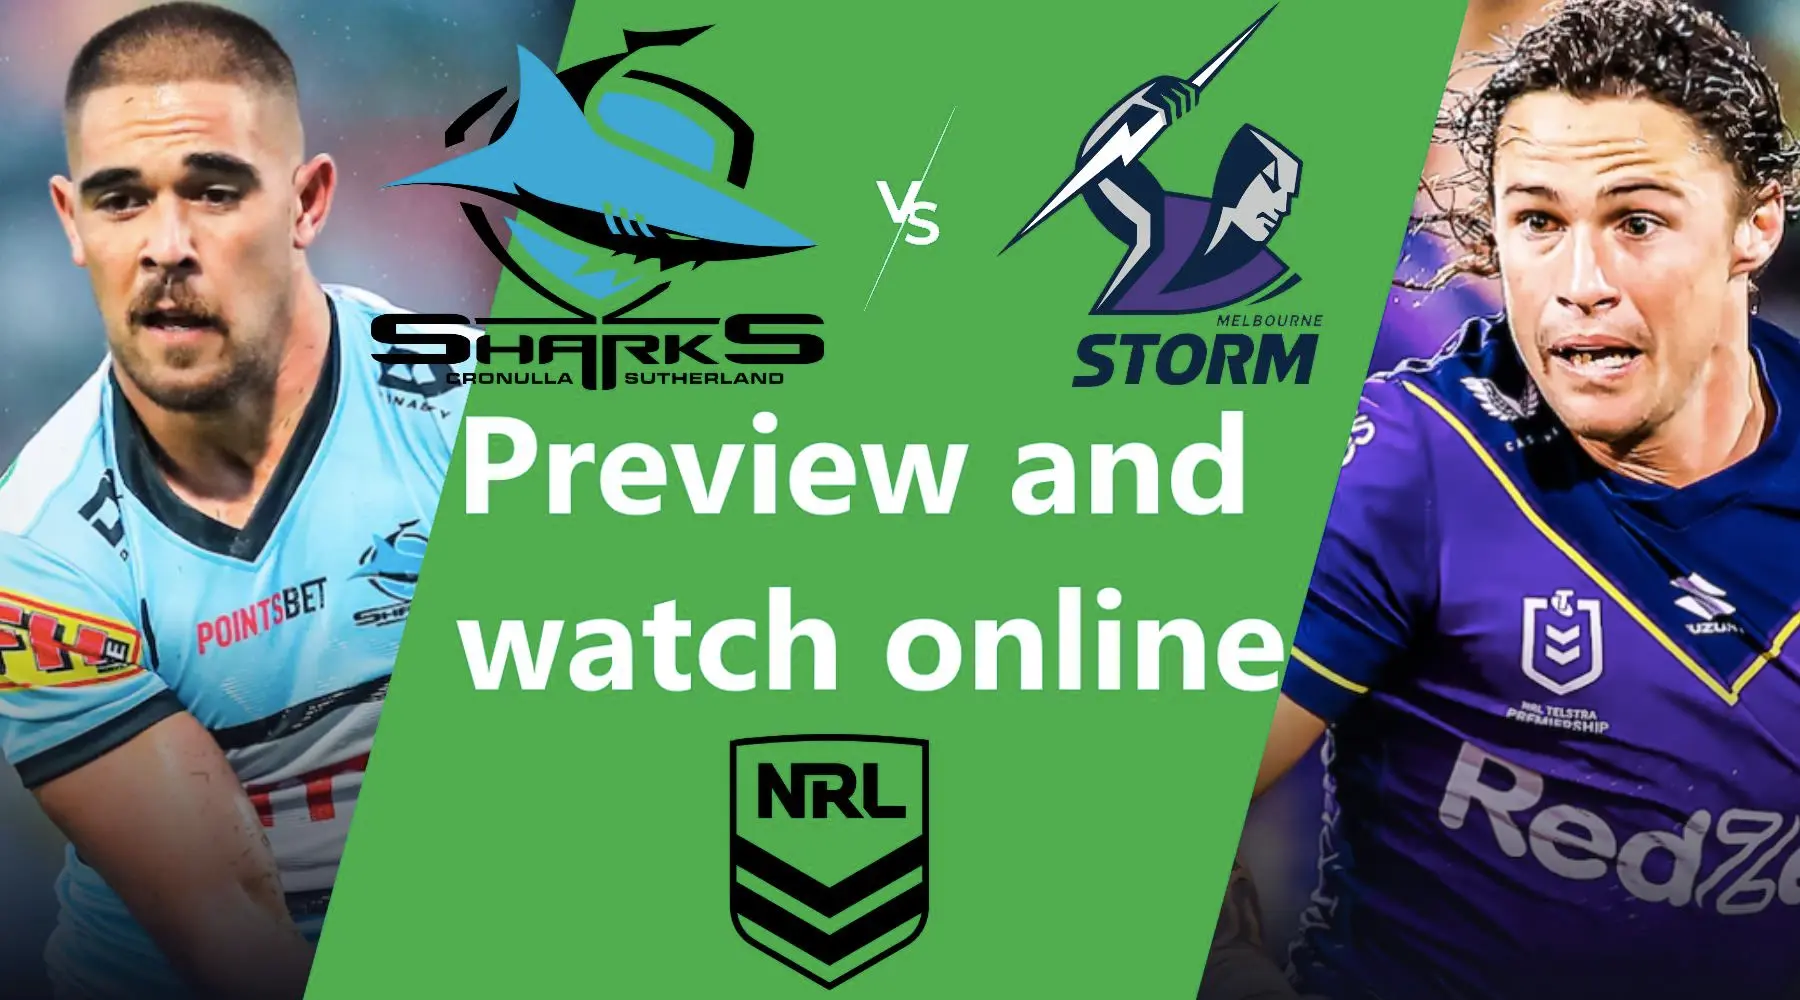 Watch Cronulla Sharks vs Melbourne Storm NRL live and match preview